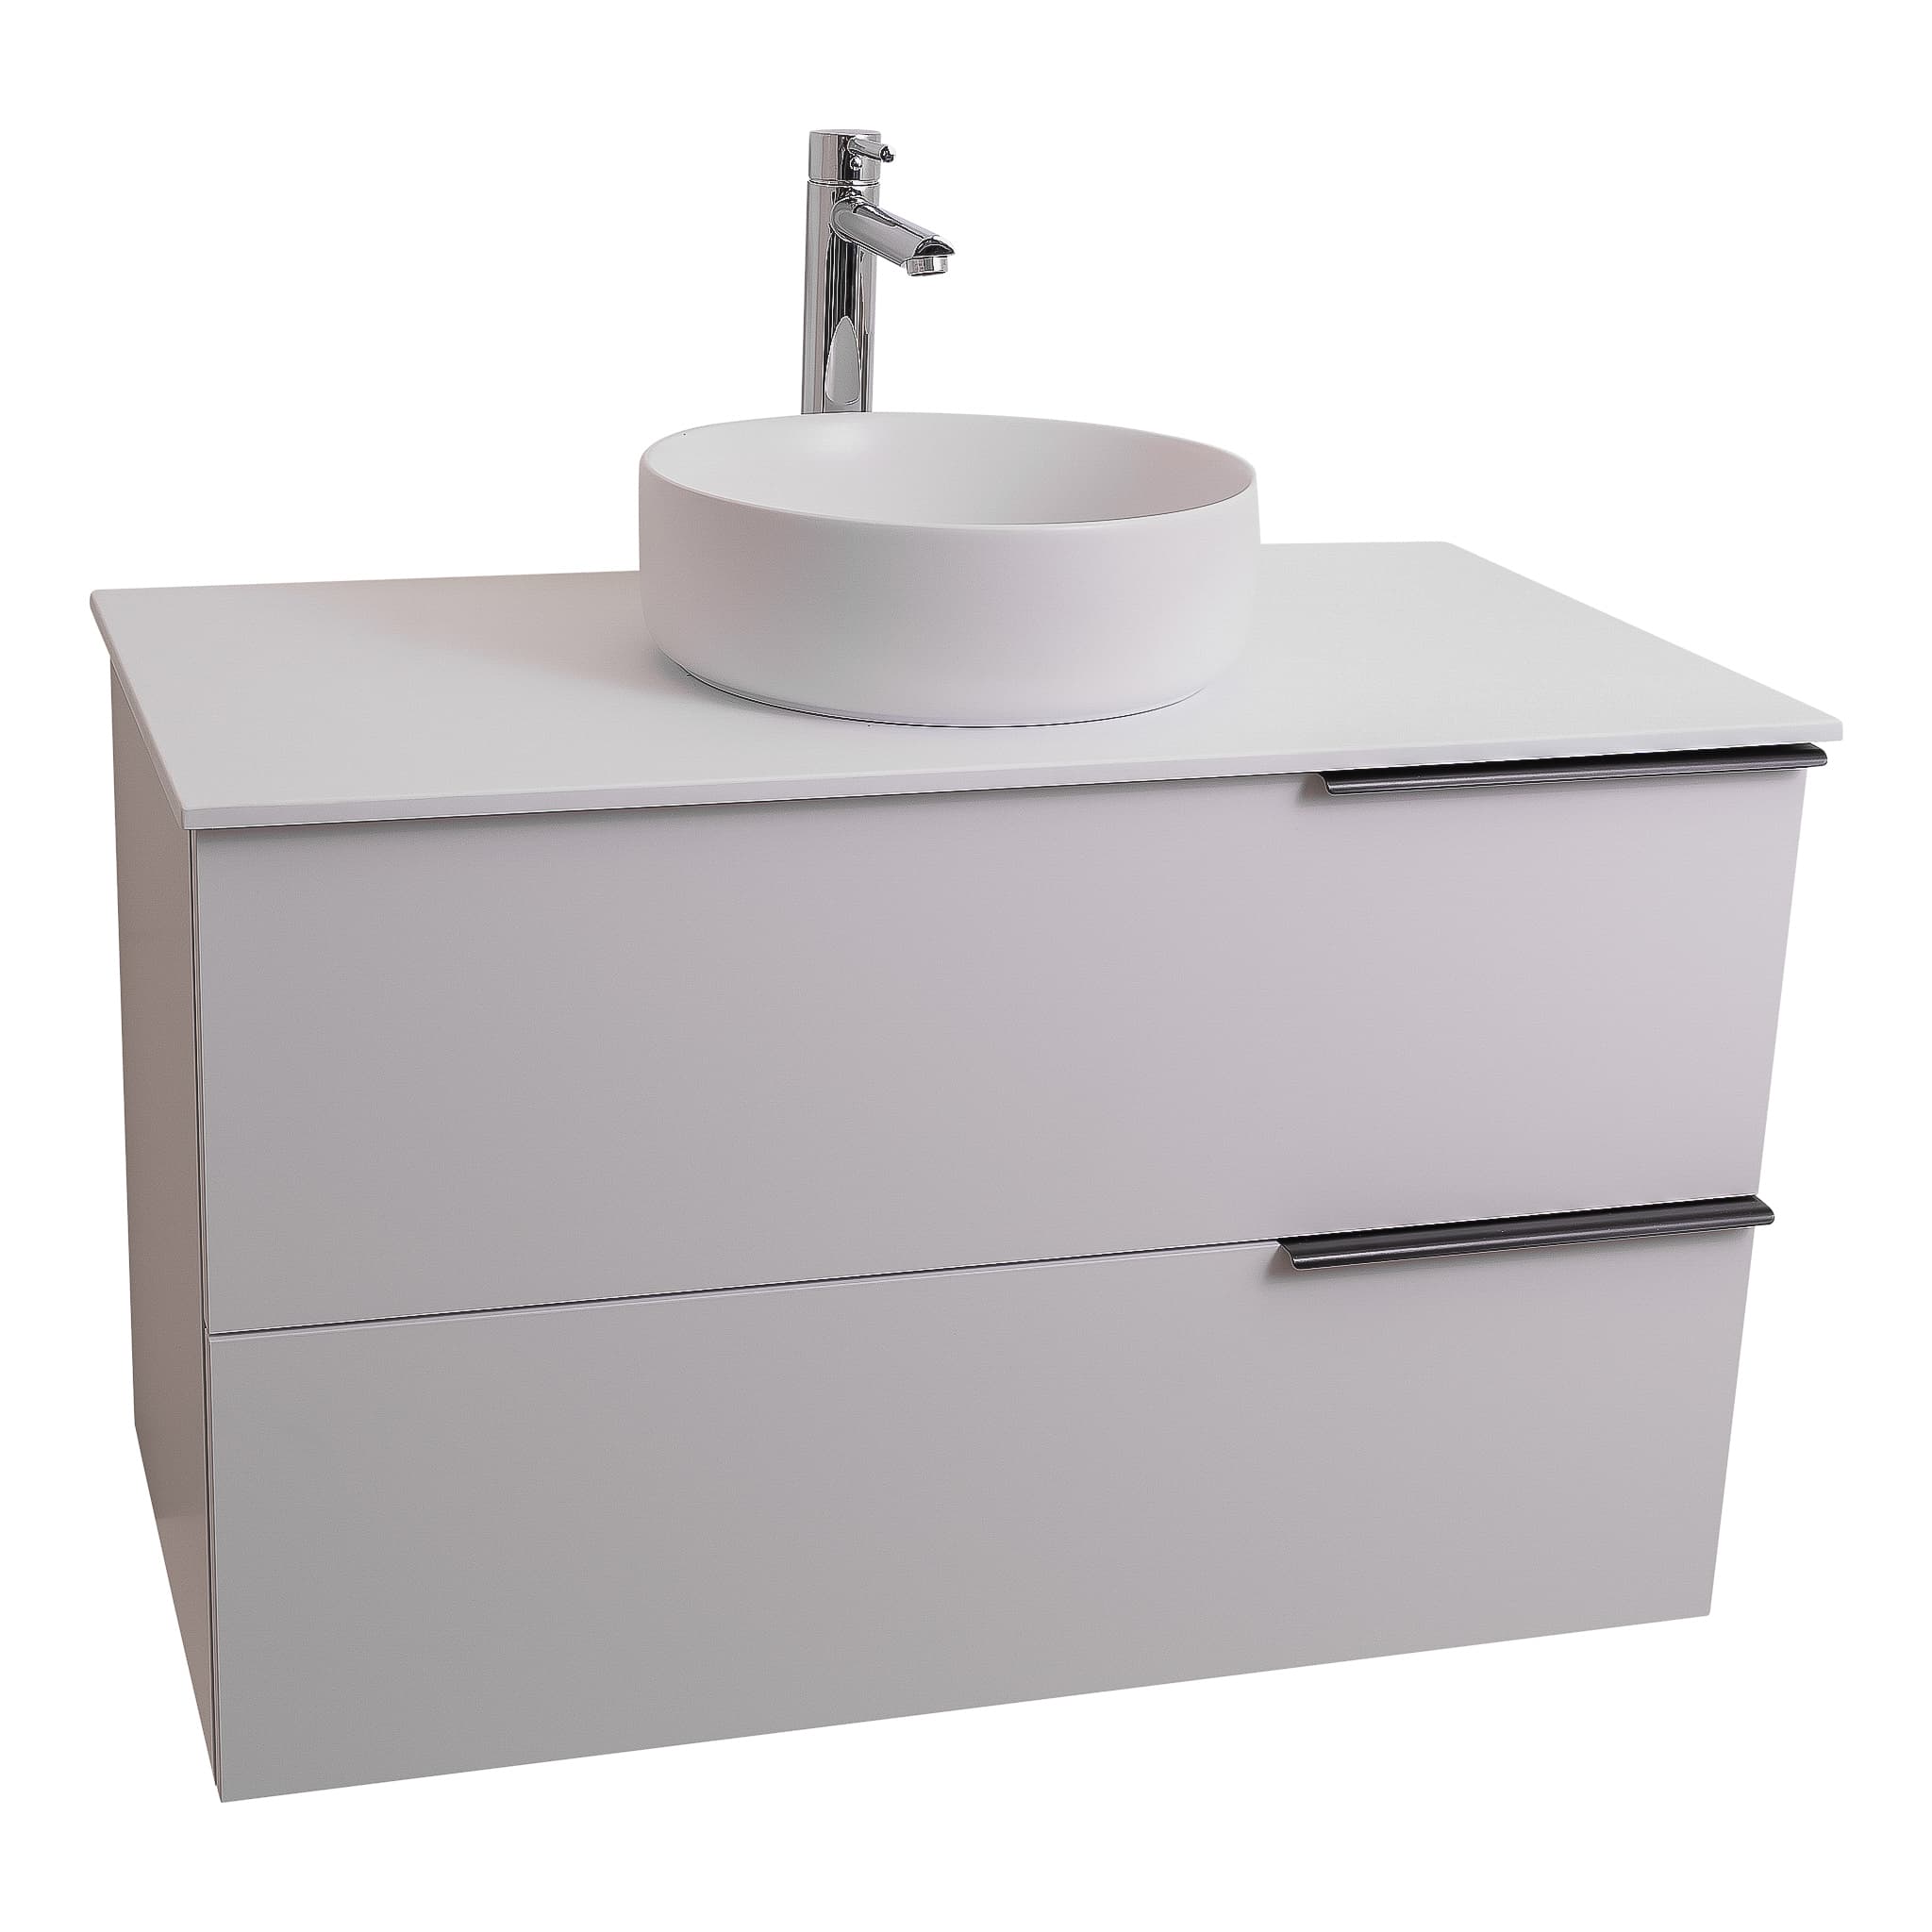 Mallorca 31.5 Matte White Cabinet, Ares White Top And Ares White Ceramic Basin, Wall Mounted Modern Vanity Set